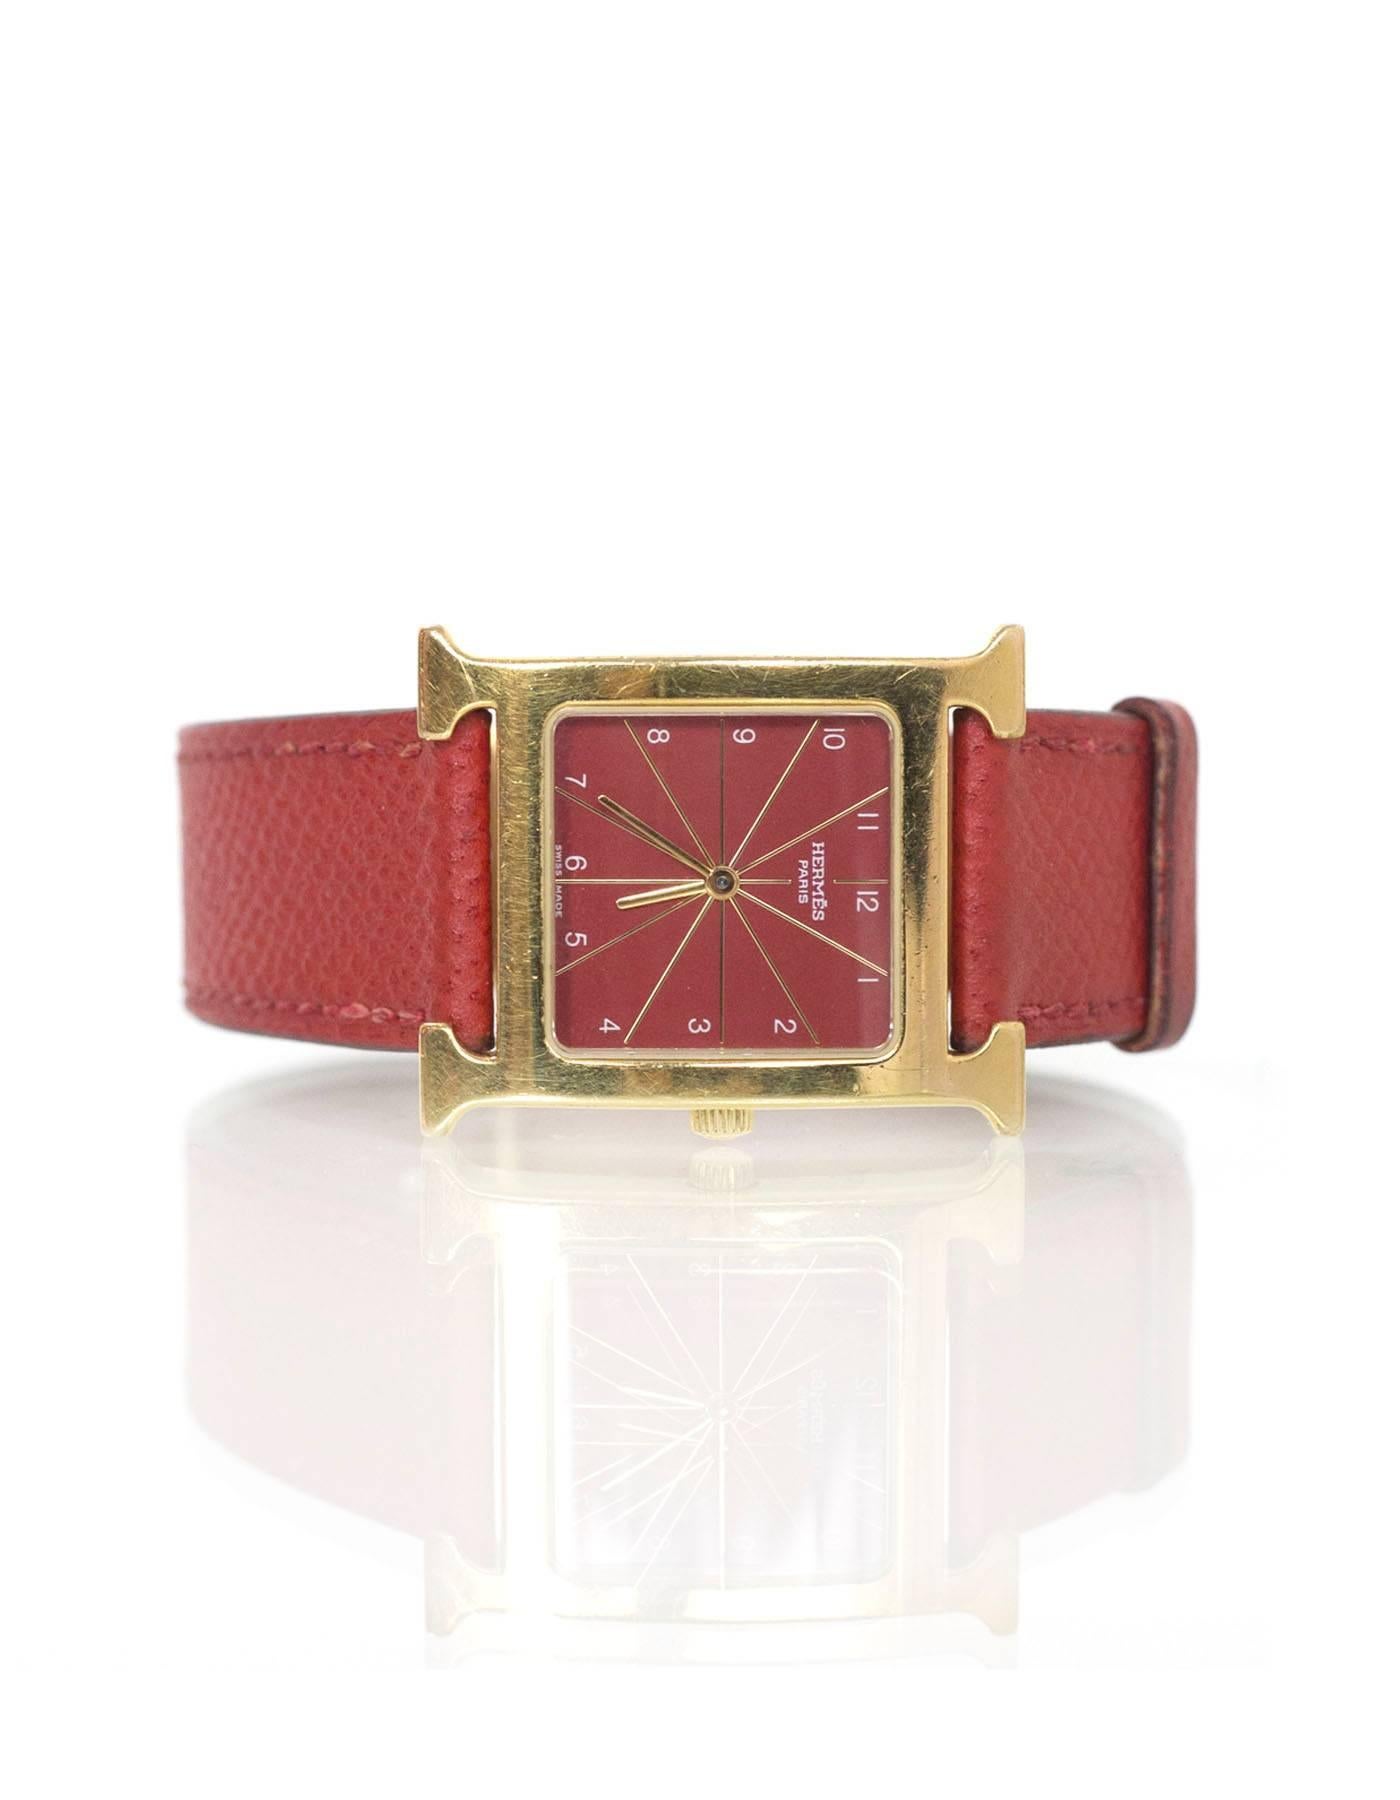 Hermes Red Heure H MM Watch.  Features red face and goldtone H

Made In: Switzerland
Year of Production: 2011/2012
Color: Red, gold
Materials: Leather, steel, glass 
Closure: Buckle
Stamp: HH1.510 1040039 
Overall Condition: Excellent pre-owned